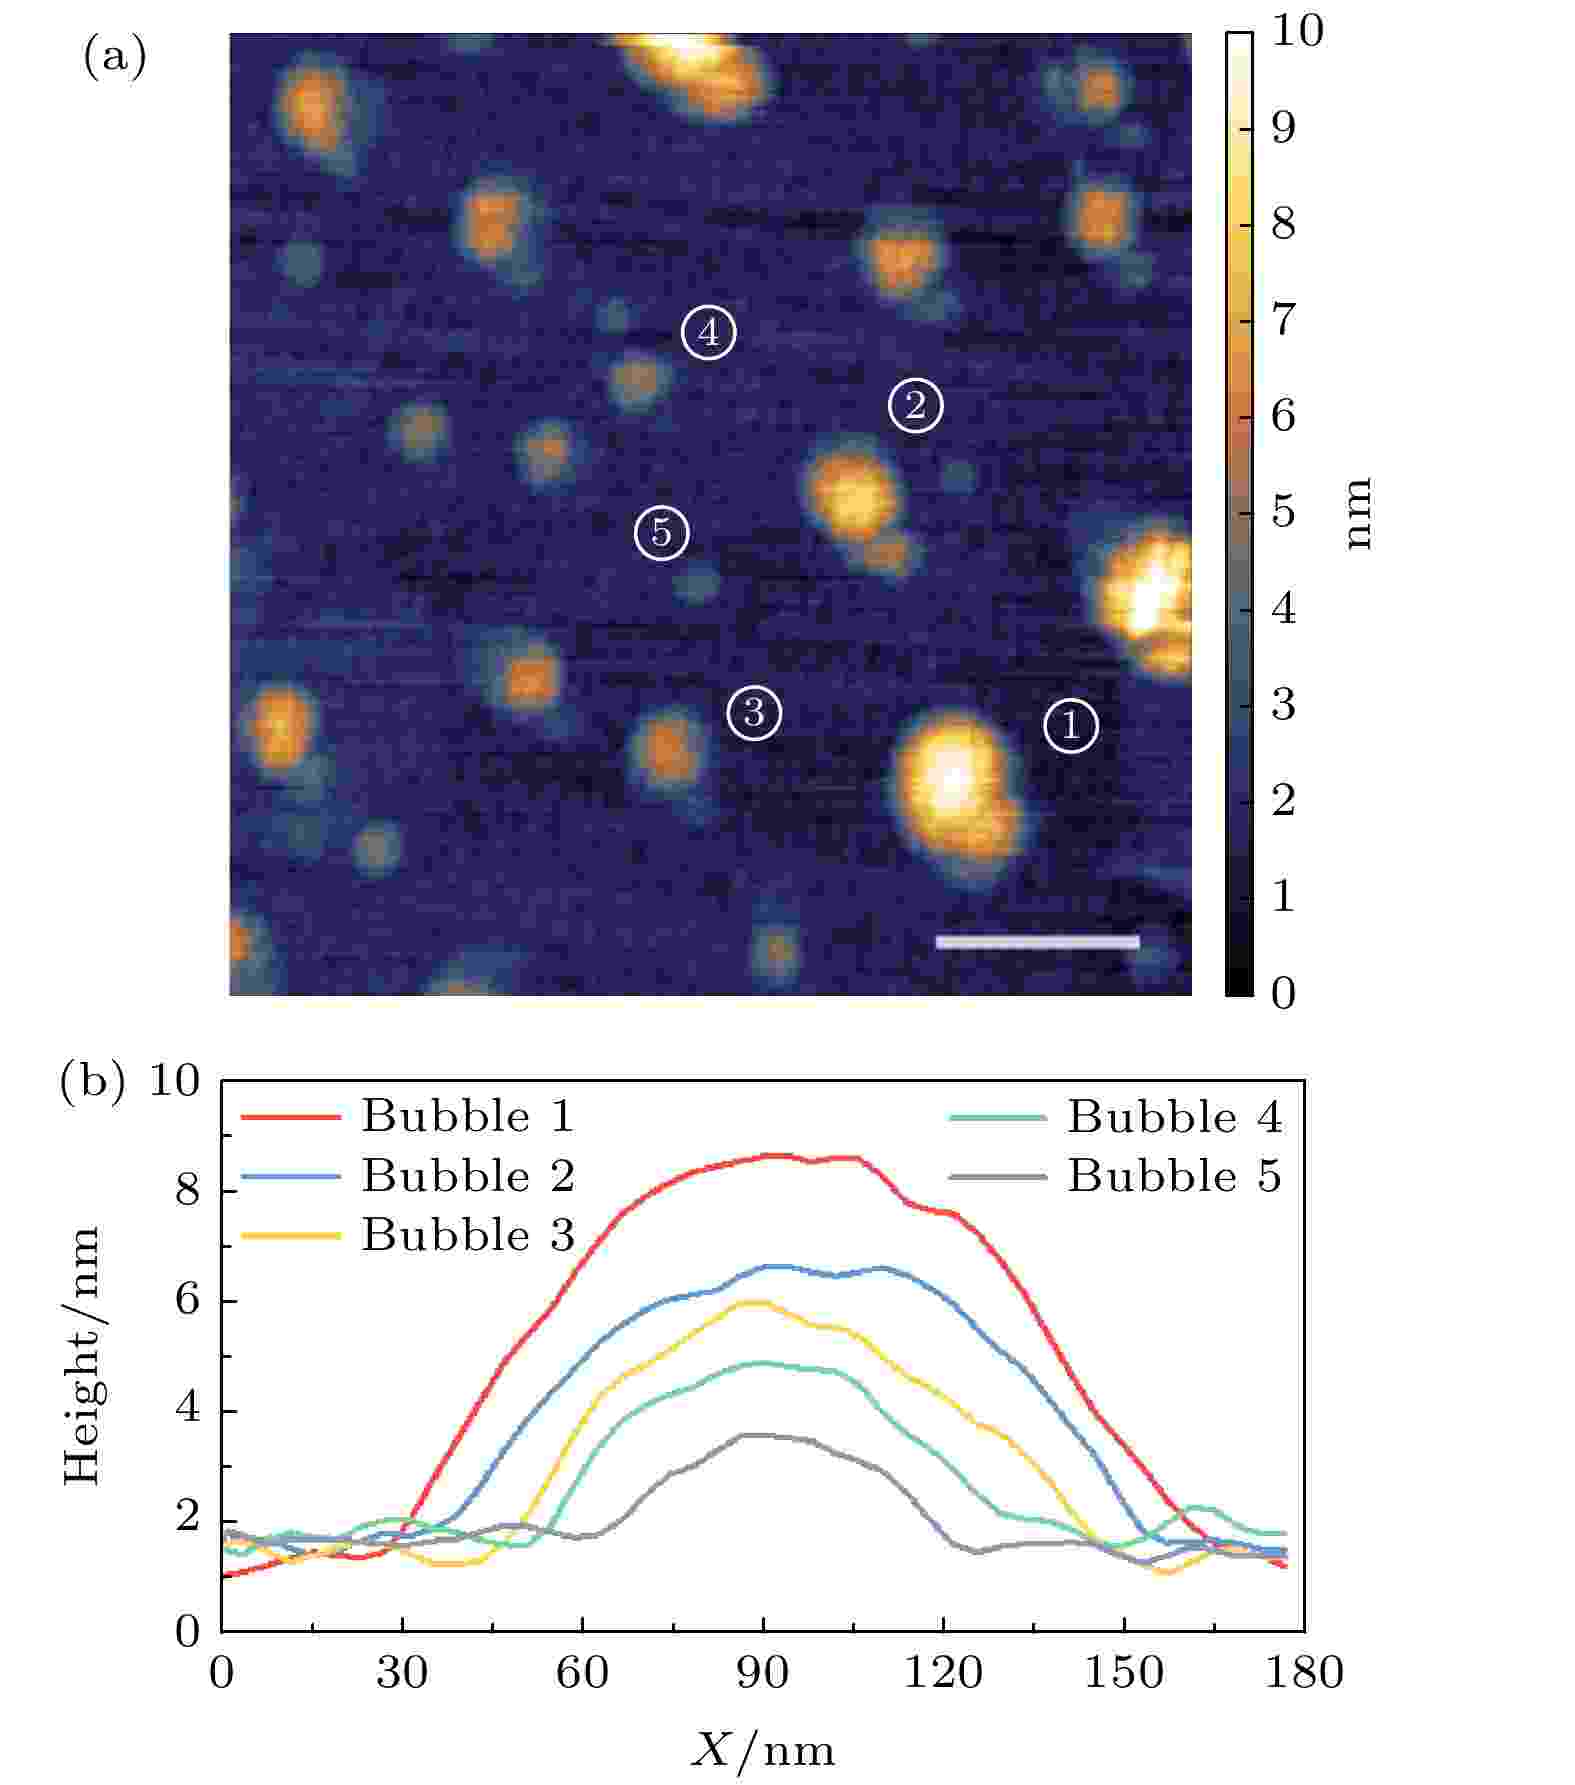 Small size bubbles obtained under short-time hydrogen plasma treatment: (a) The distribution of small size bubbles, the size scale is 150 nm; (b) the cross-sectional profile view of the small bubbles marked with numbers in panel (a).